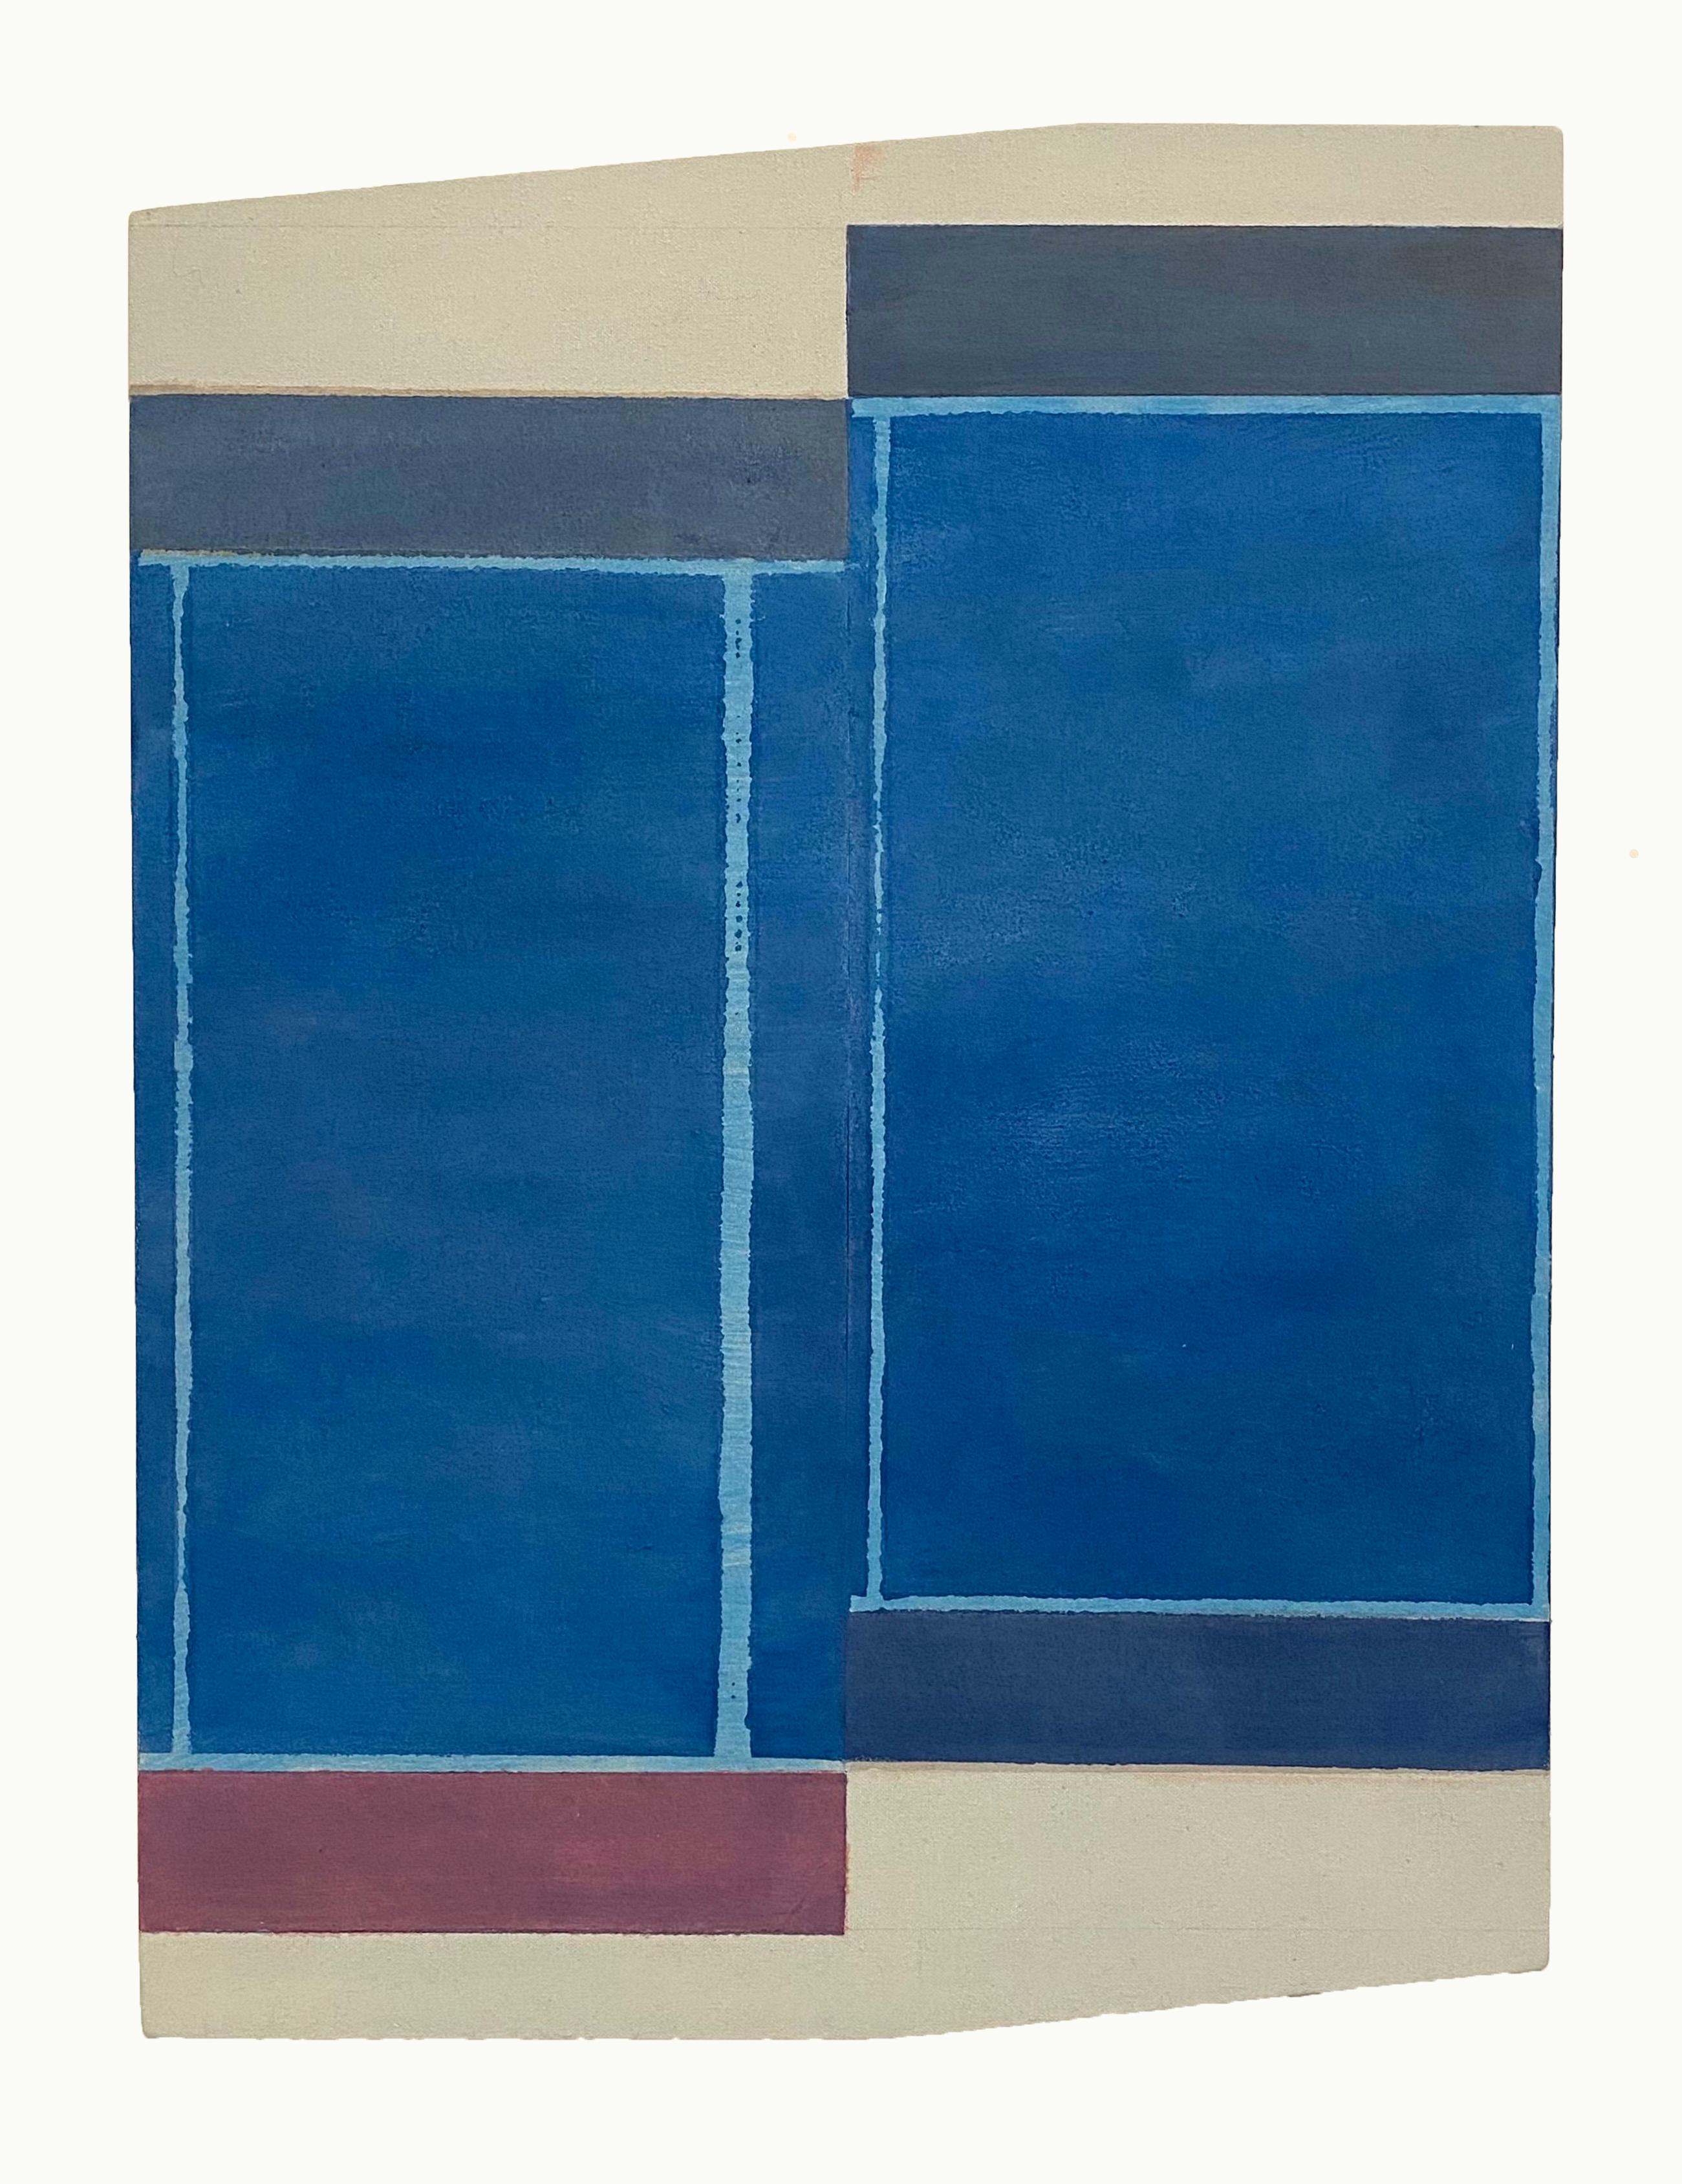 In this painting in acrylic on canvas mounted on a shaped panel by Elizabeth Gourlay, carefully ordered blocks of color in a deep shade of dark cobalt blue with a thinner block in purple are vibrant against two neutral sections in beige on the top